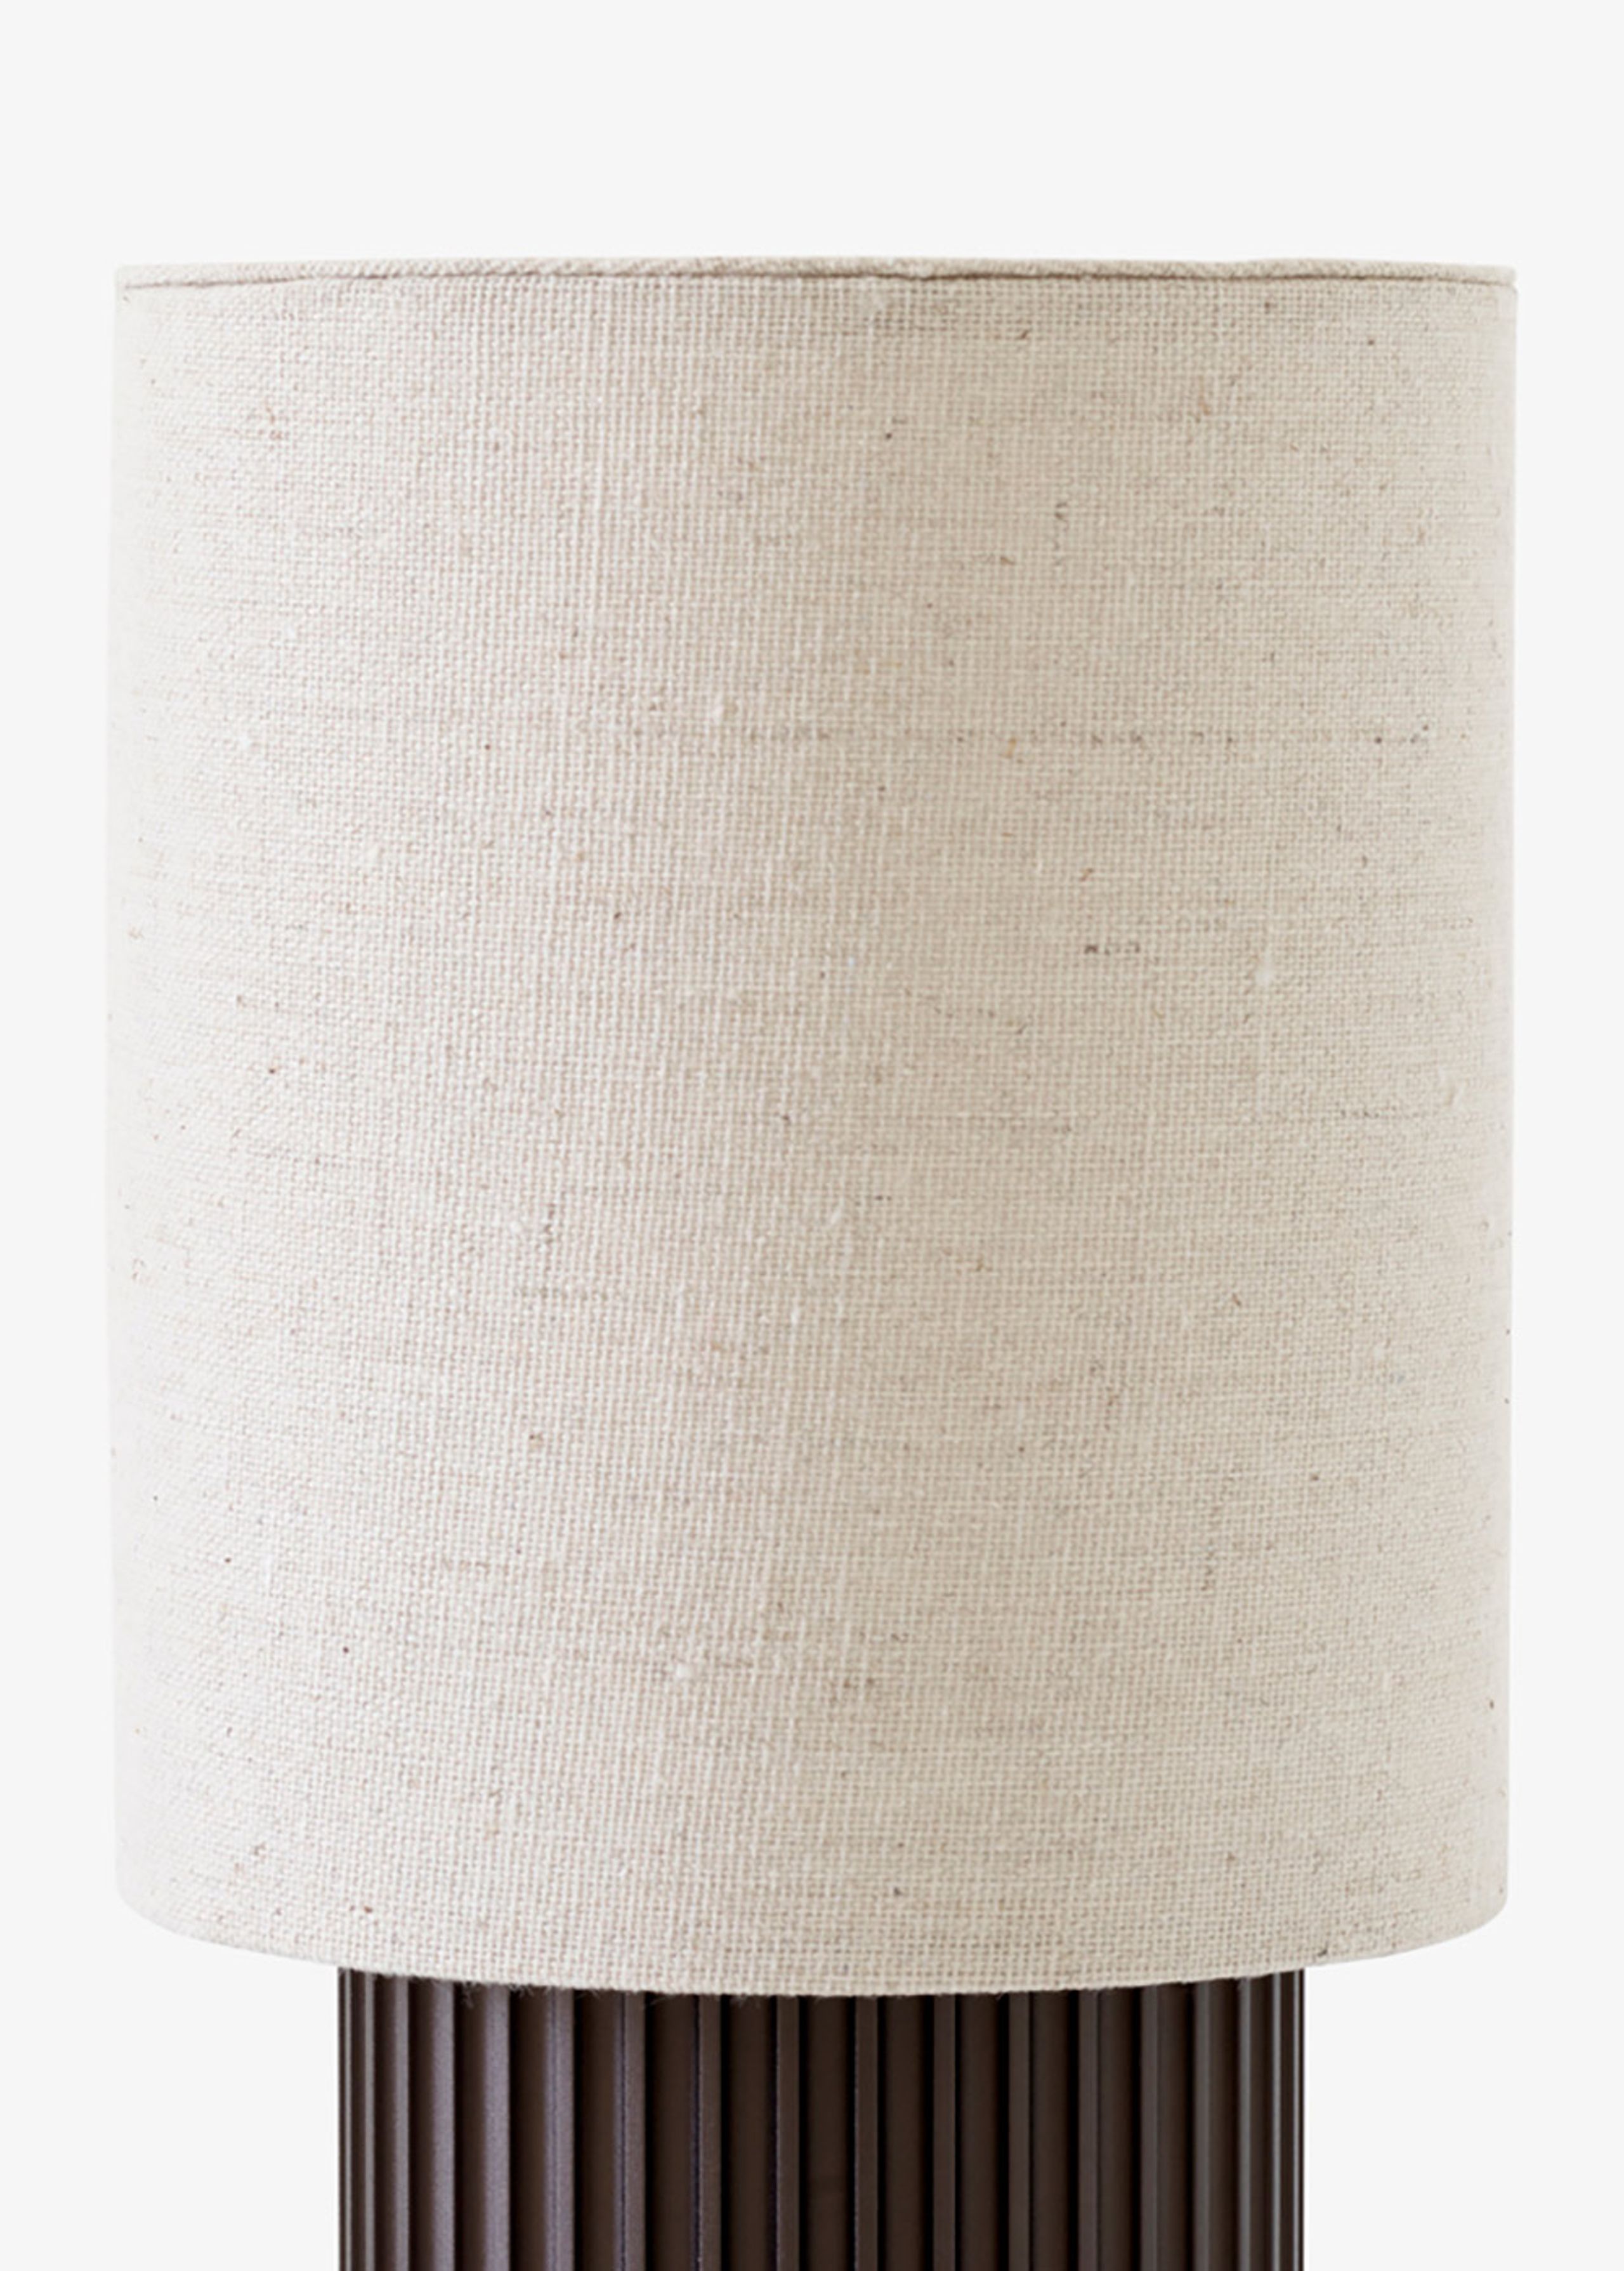 &tradition - Abat-jour - Textile Shade for SC52 Manhattan - Lamp Shade